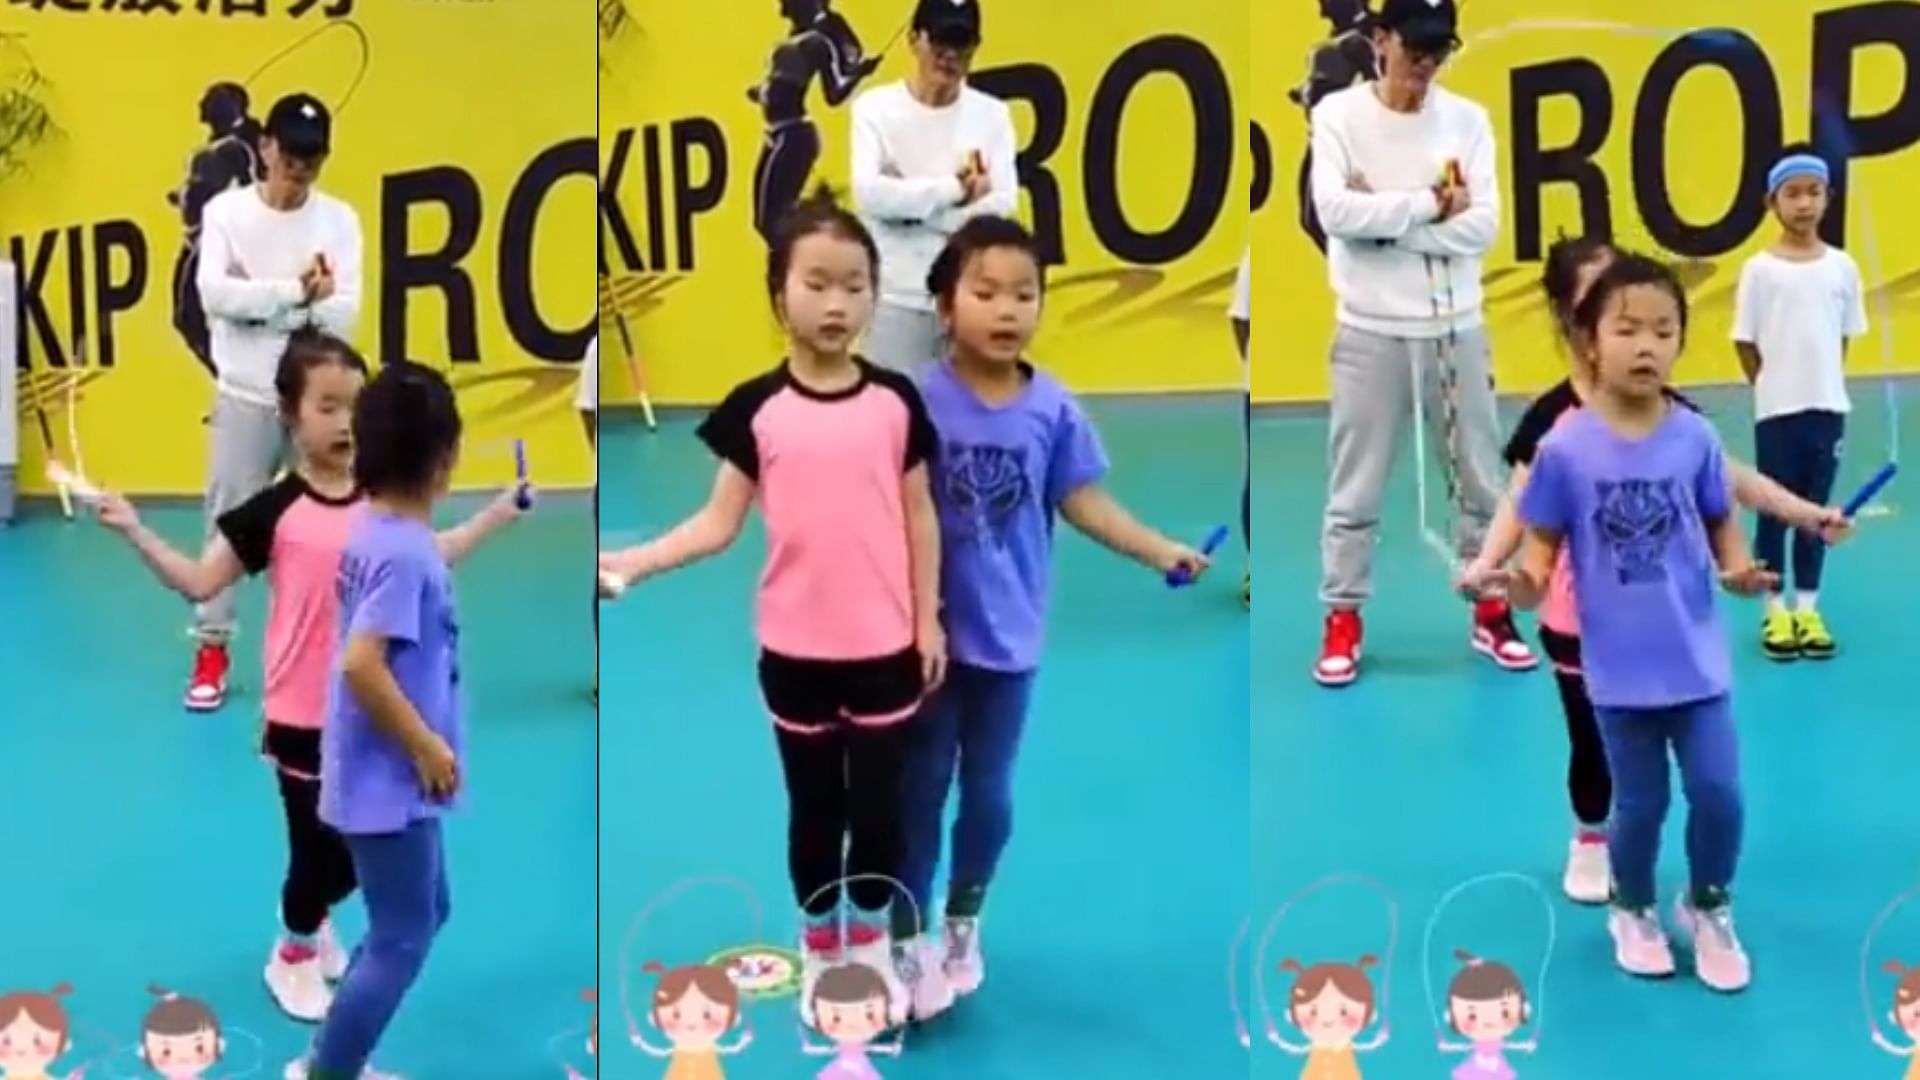 Viral Video young girls skipping rope together show coordination and balance